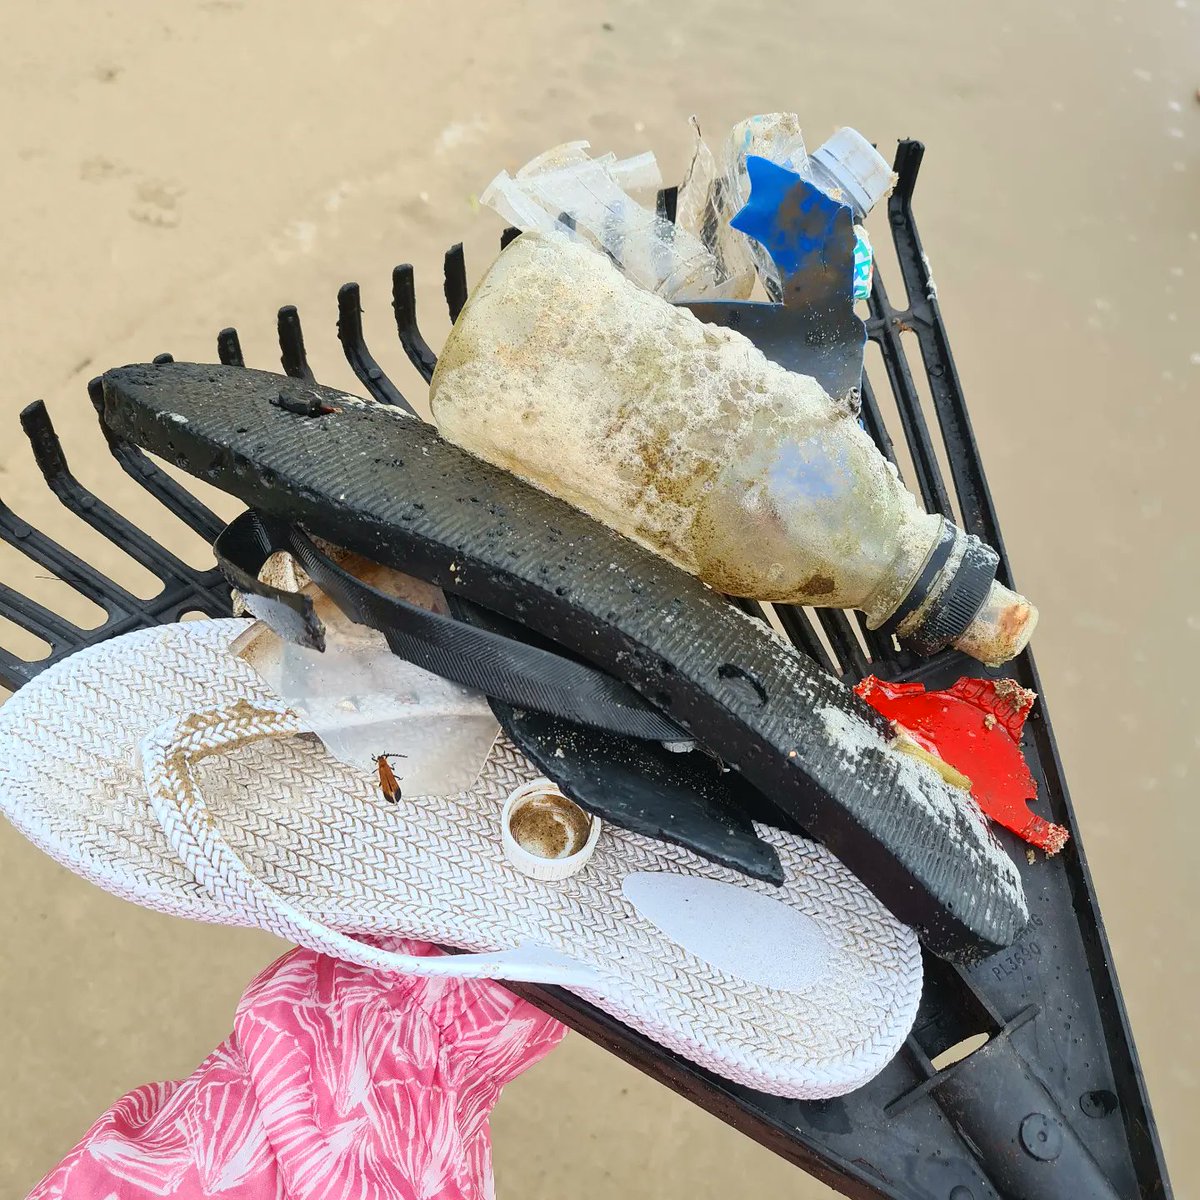 Clean up Australia Day 💙💚

Sunday 5th March.

#beachcleanups

If you see plastic on the beach.. pick it up & take it with you 🥤🩴

Every action makes a difference 💚💙